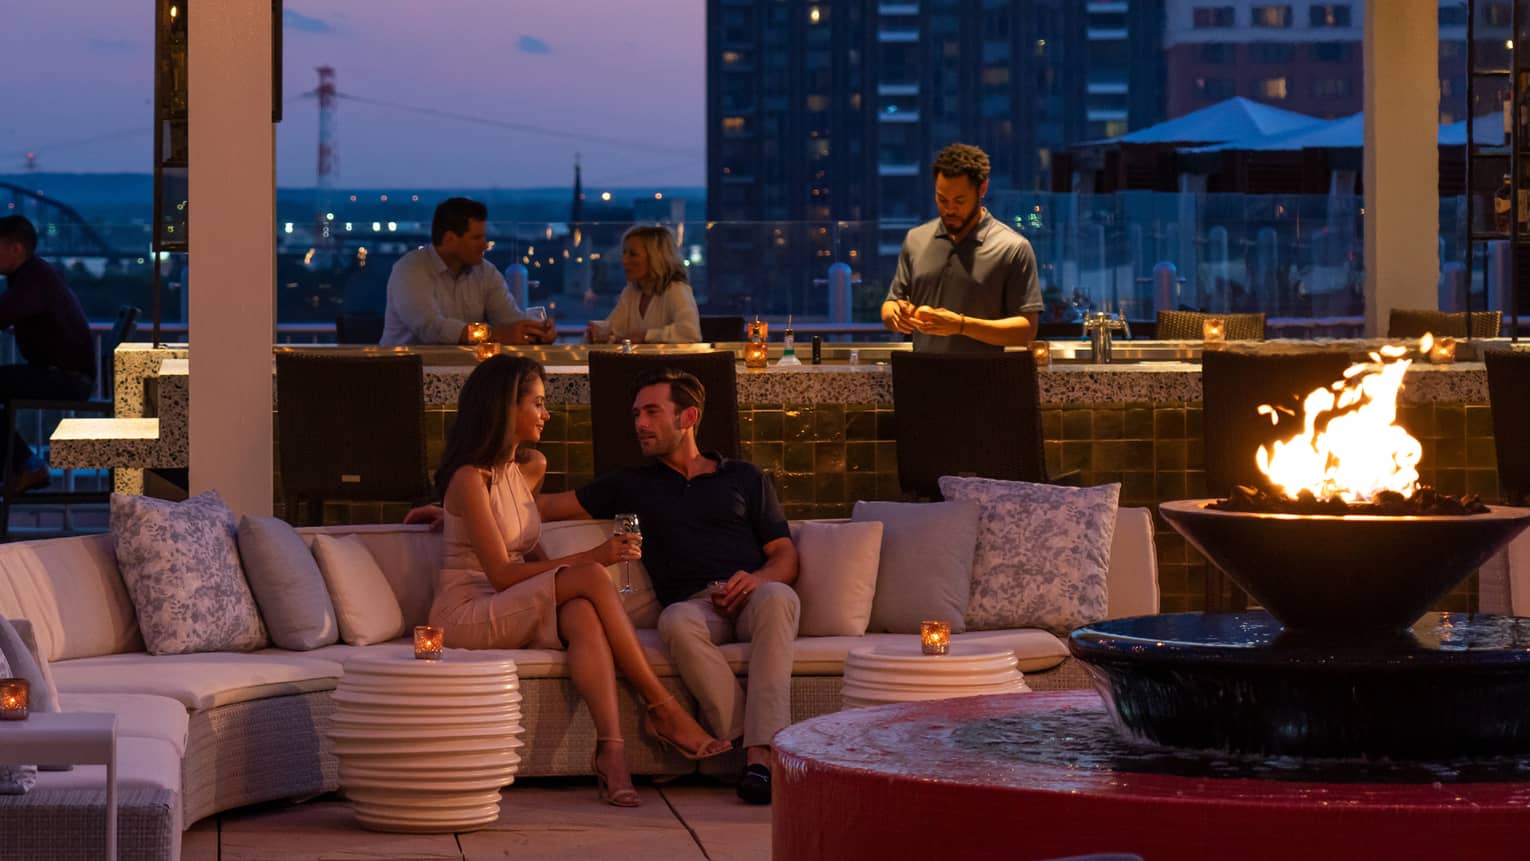 The sky is dark beyond the cinderhouse rooftop bar – furnished with a curved sectional, fire pit, hanging lights and people socialize 